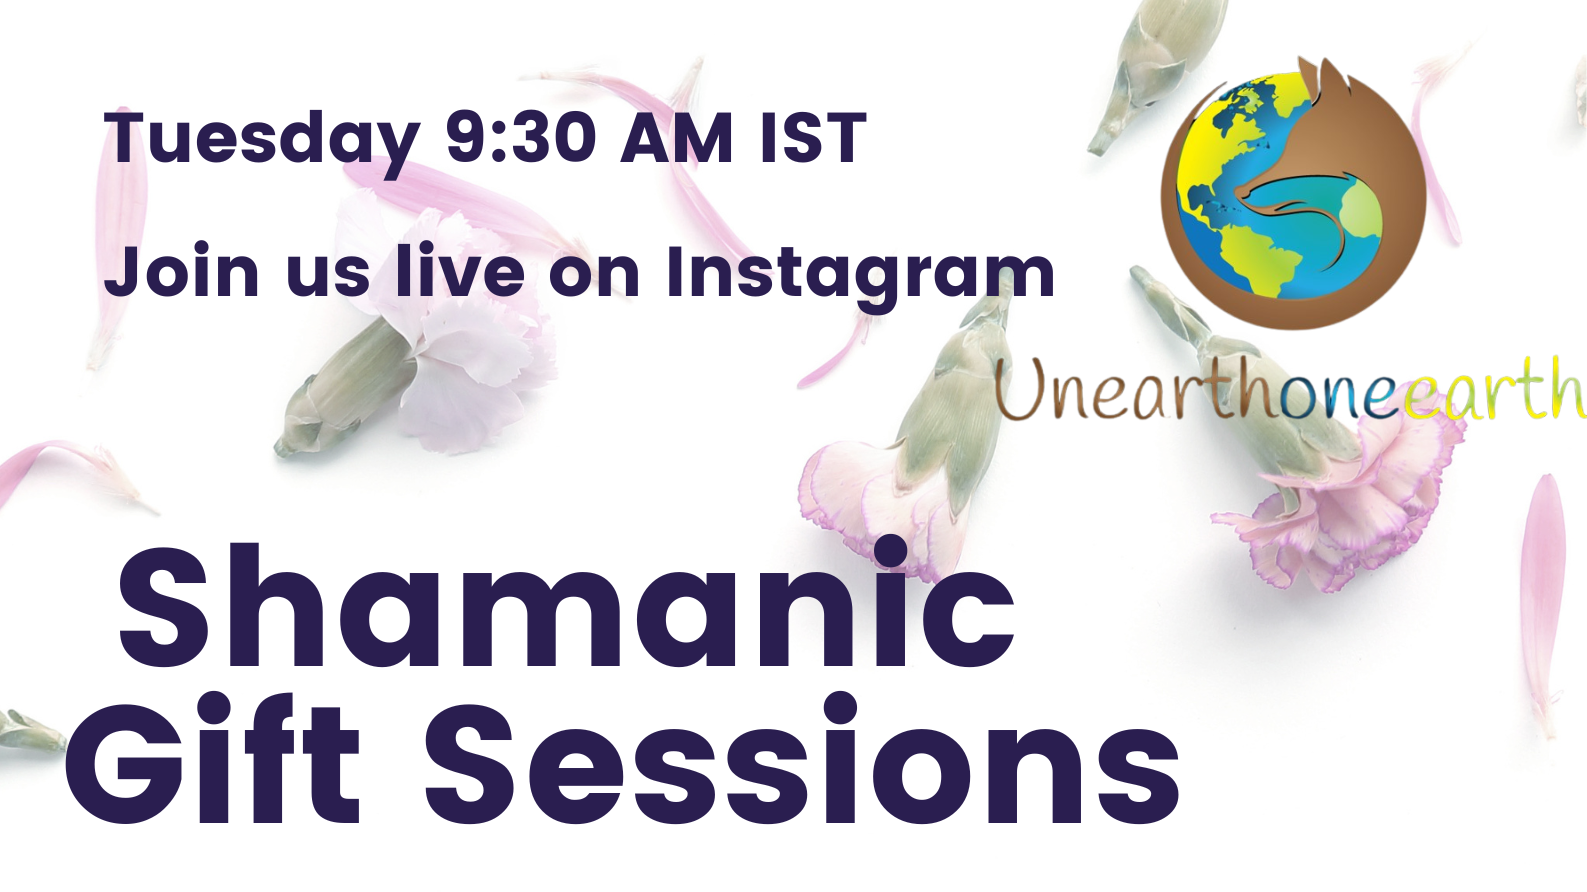  Weekly Shamanic Gift Sessions - Tuesday 9:30 AM IST